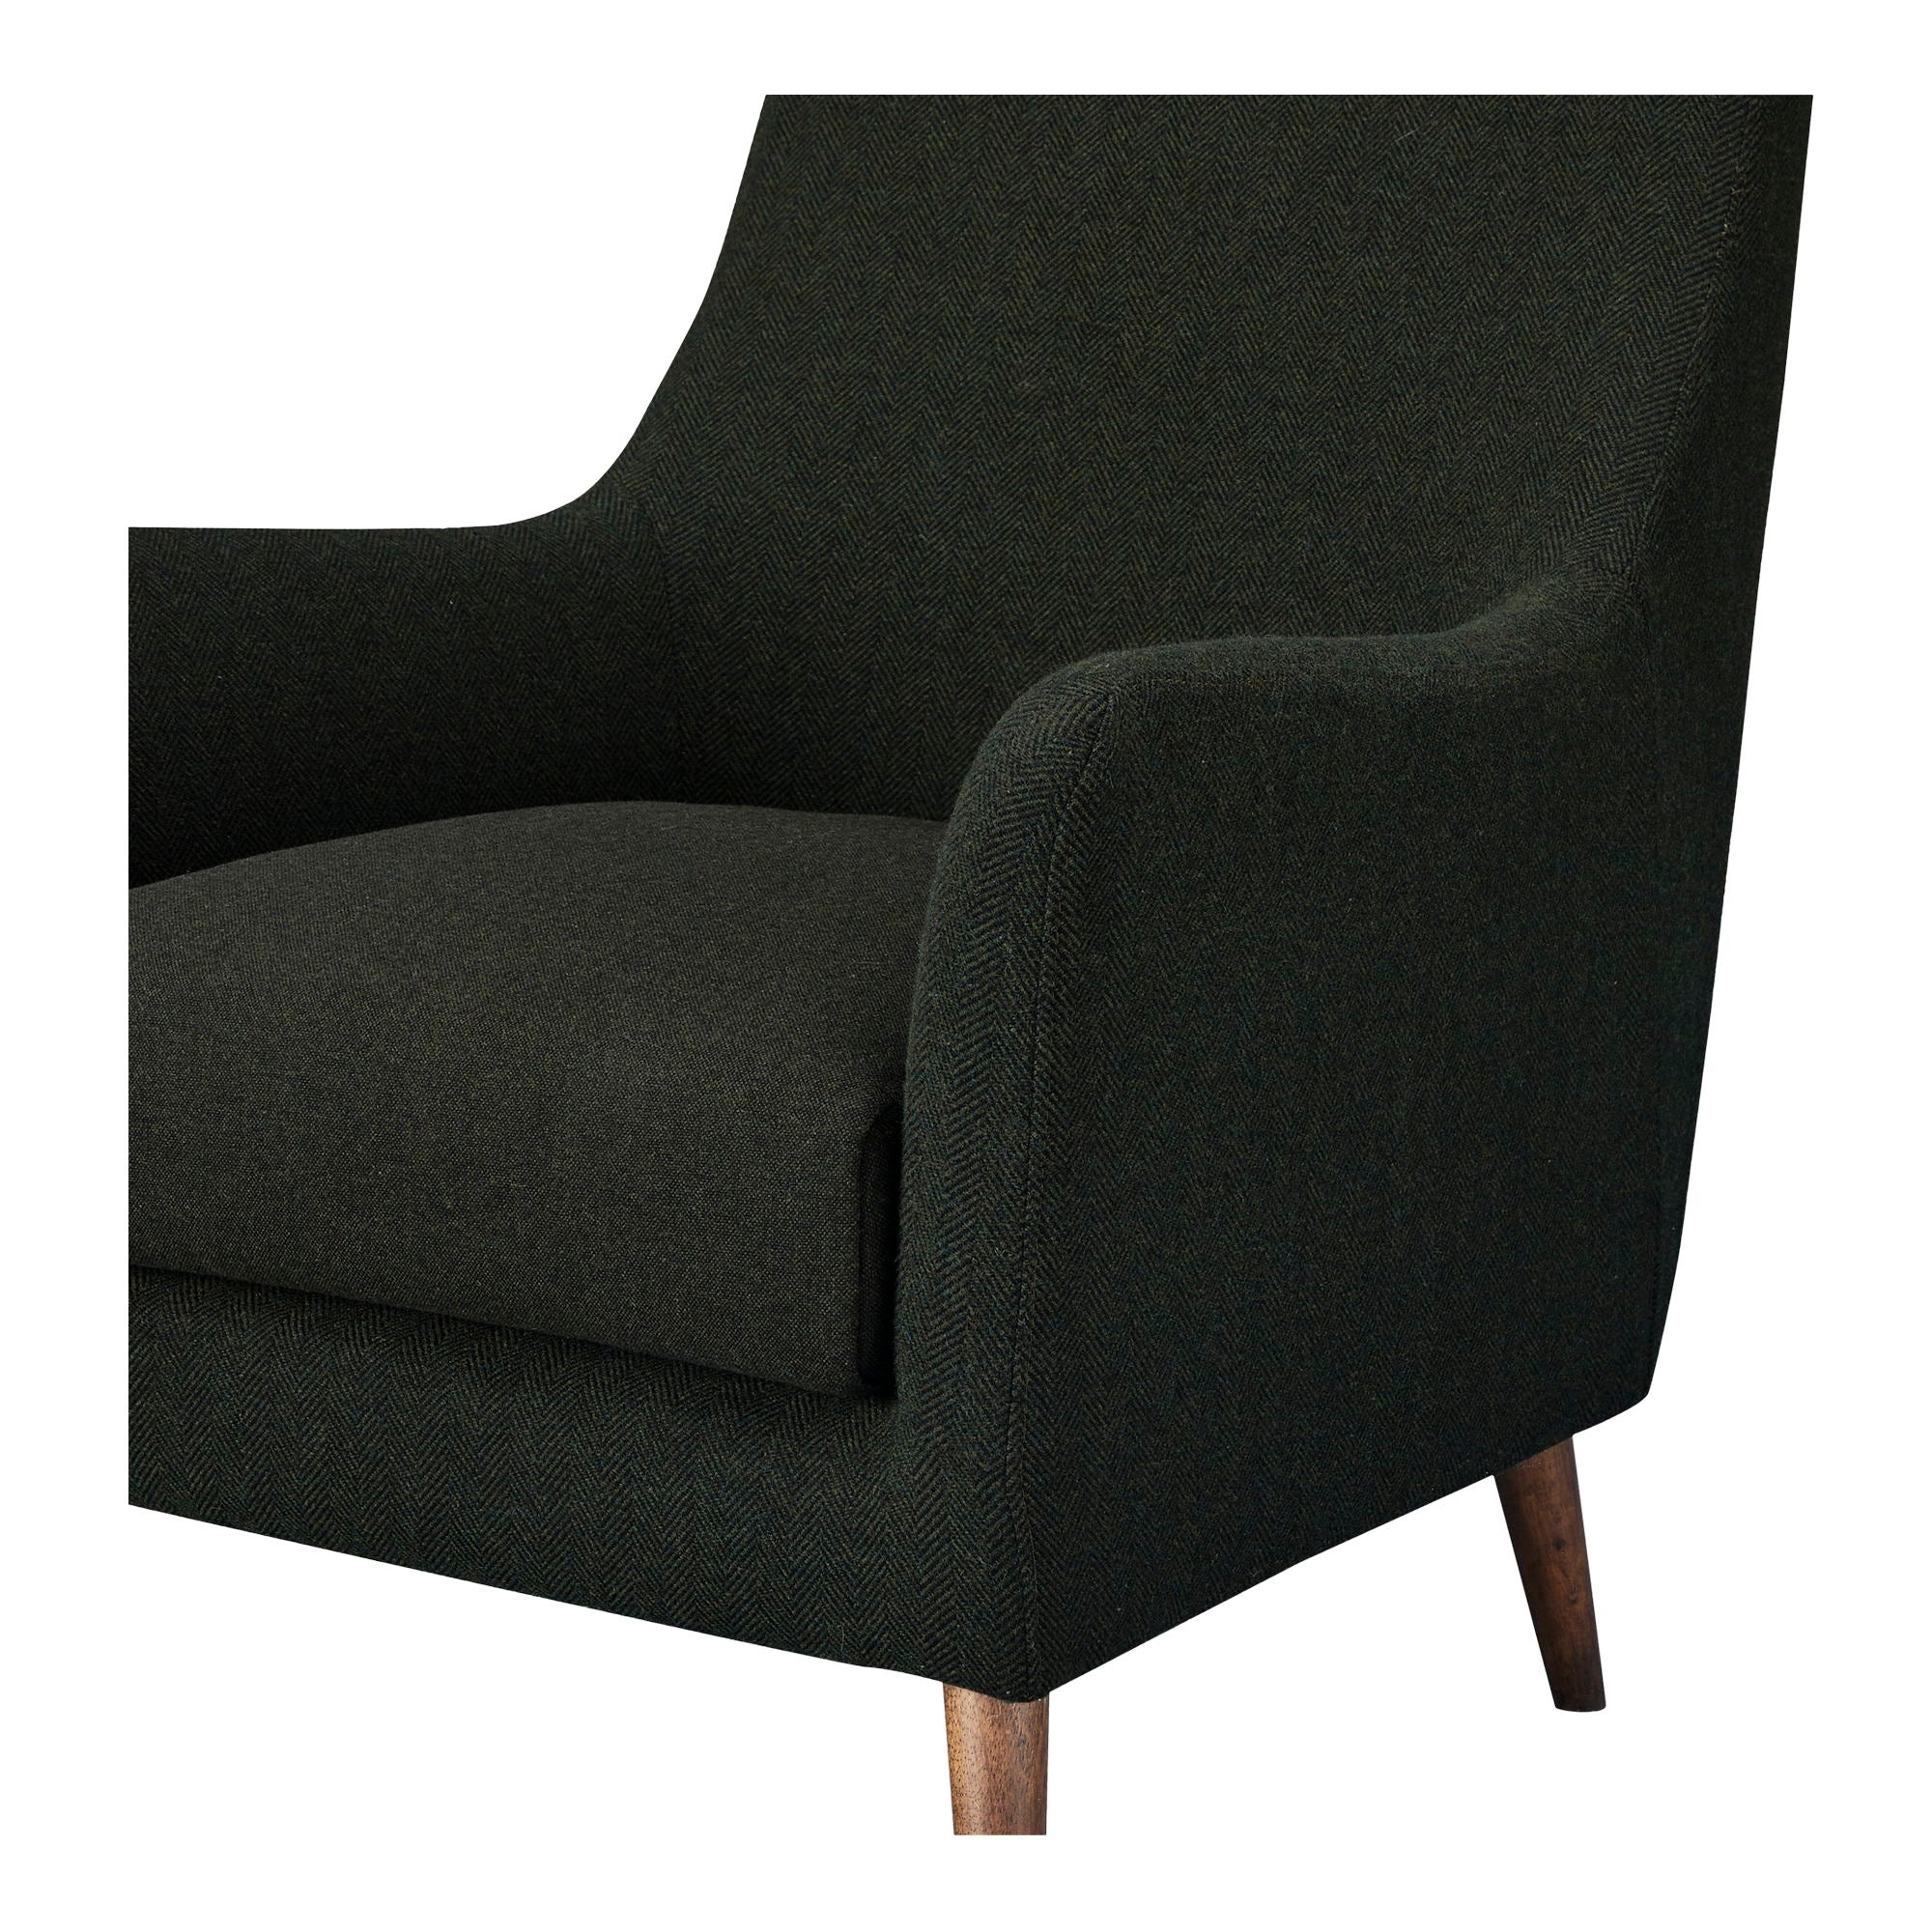 Fisher - Armchair - Olive Wool Blend